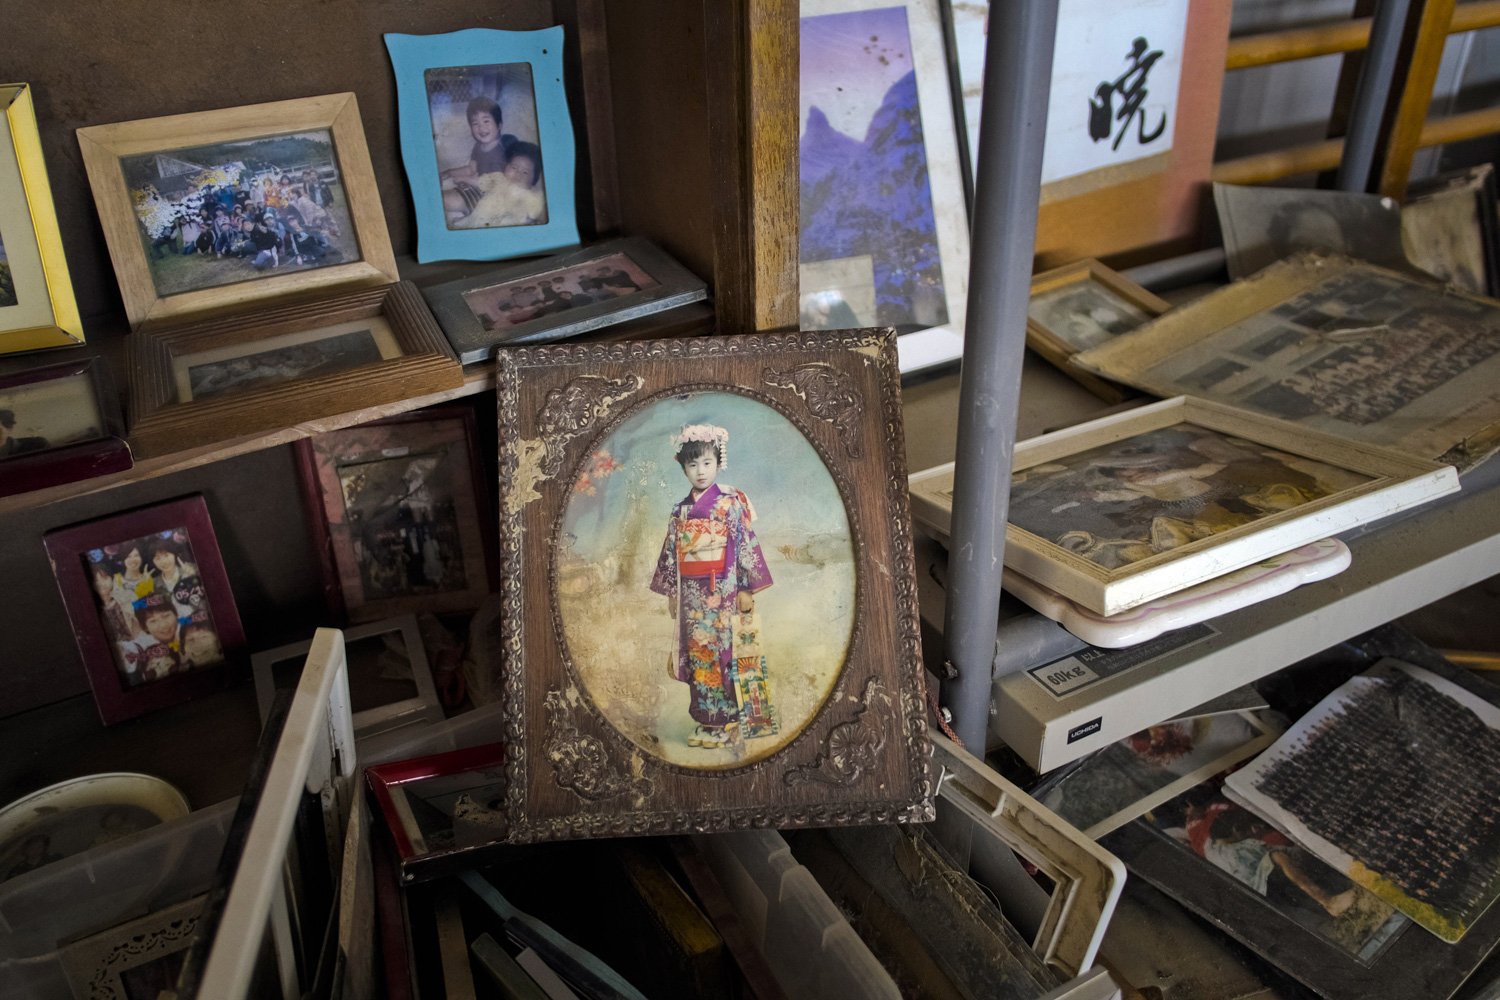 March 2, 2012. Photographs lie in a school gymnasium set up as a collection site for lost possessions from last year's tsunami in the Yuriage area of Natori, Japan.